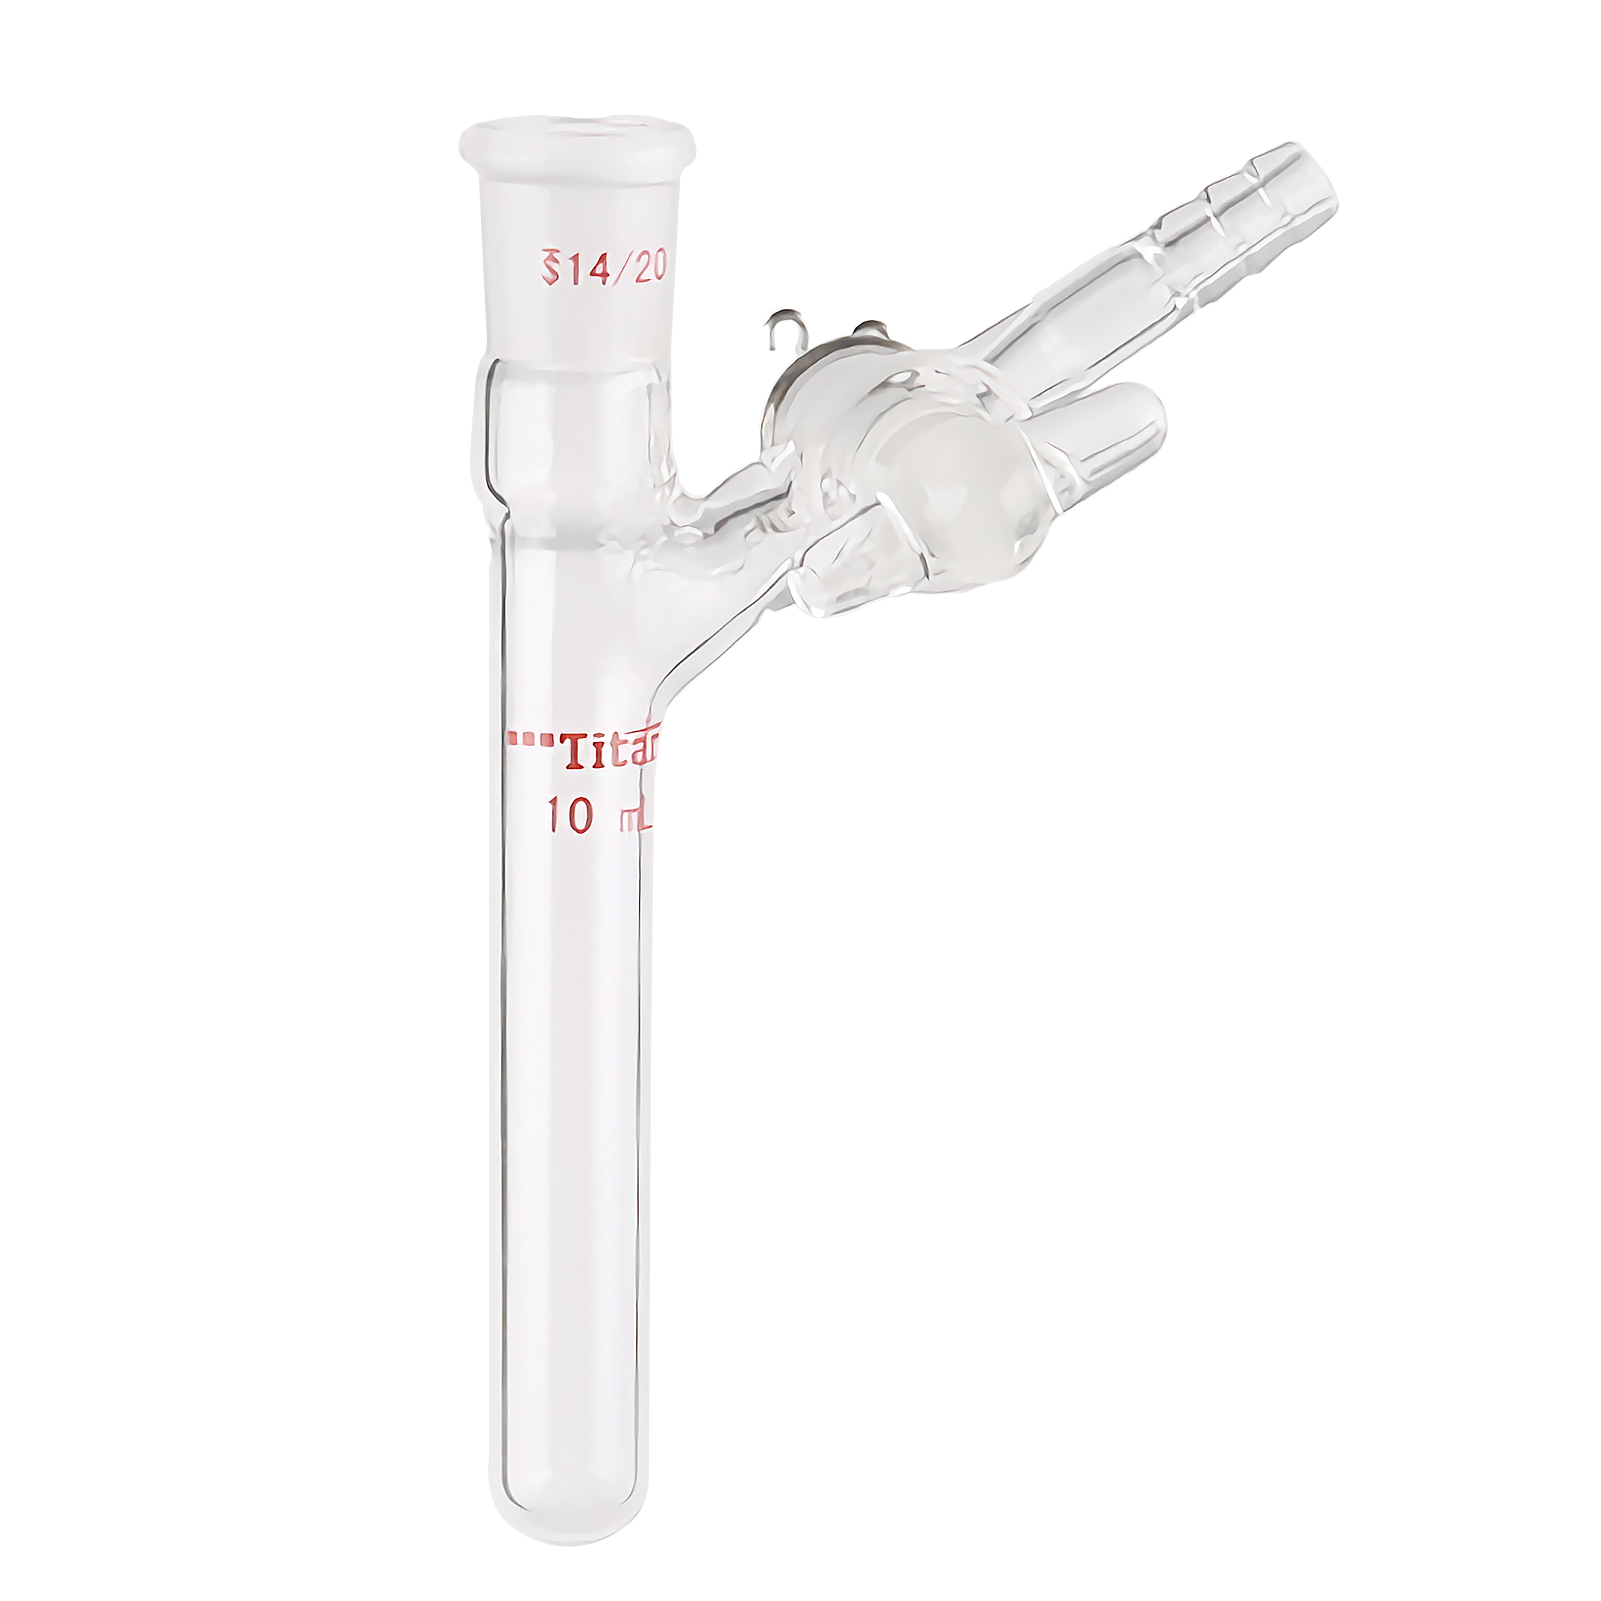 ADAMAS-BETA Glass Thick Wall Two-way Reaction Tubes with Branch Pipe Glass Stopcock Grinding Mouth 10-50ml  Lab Glassware Experiment Supplies